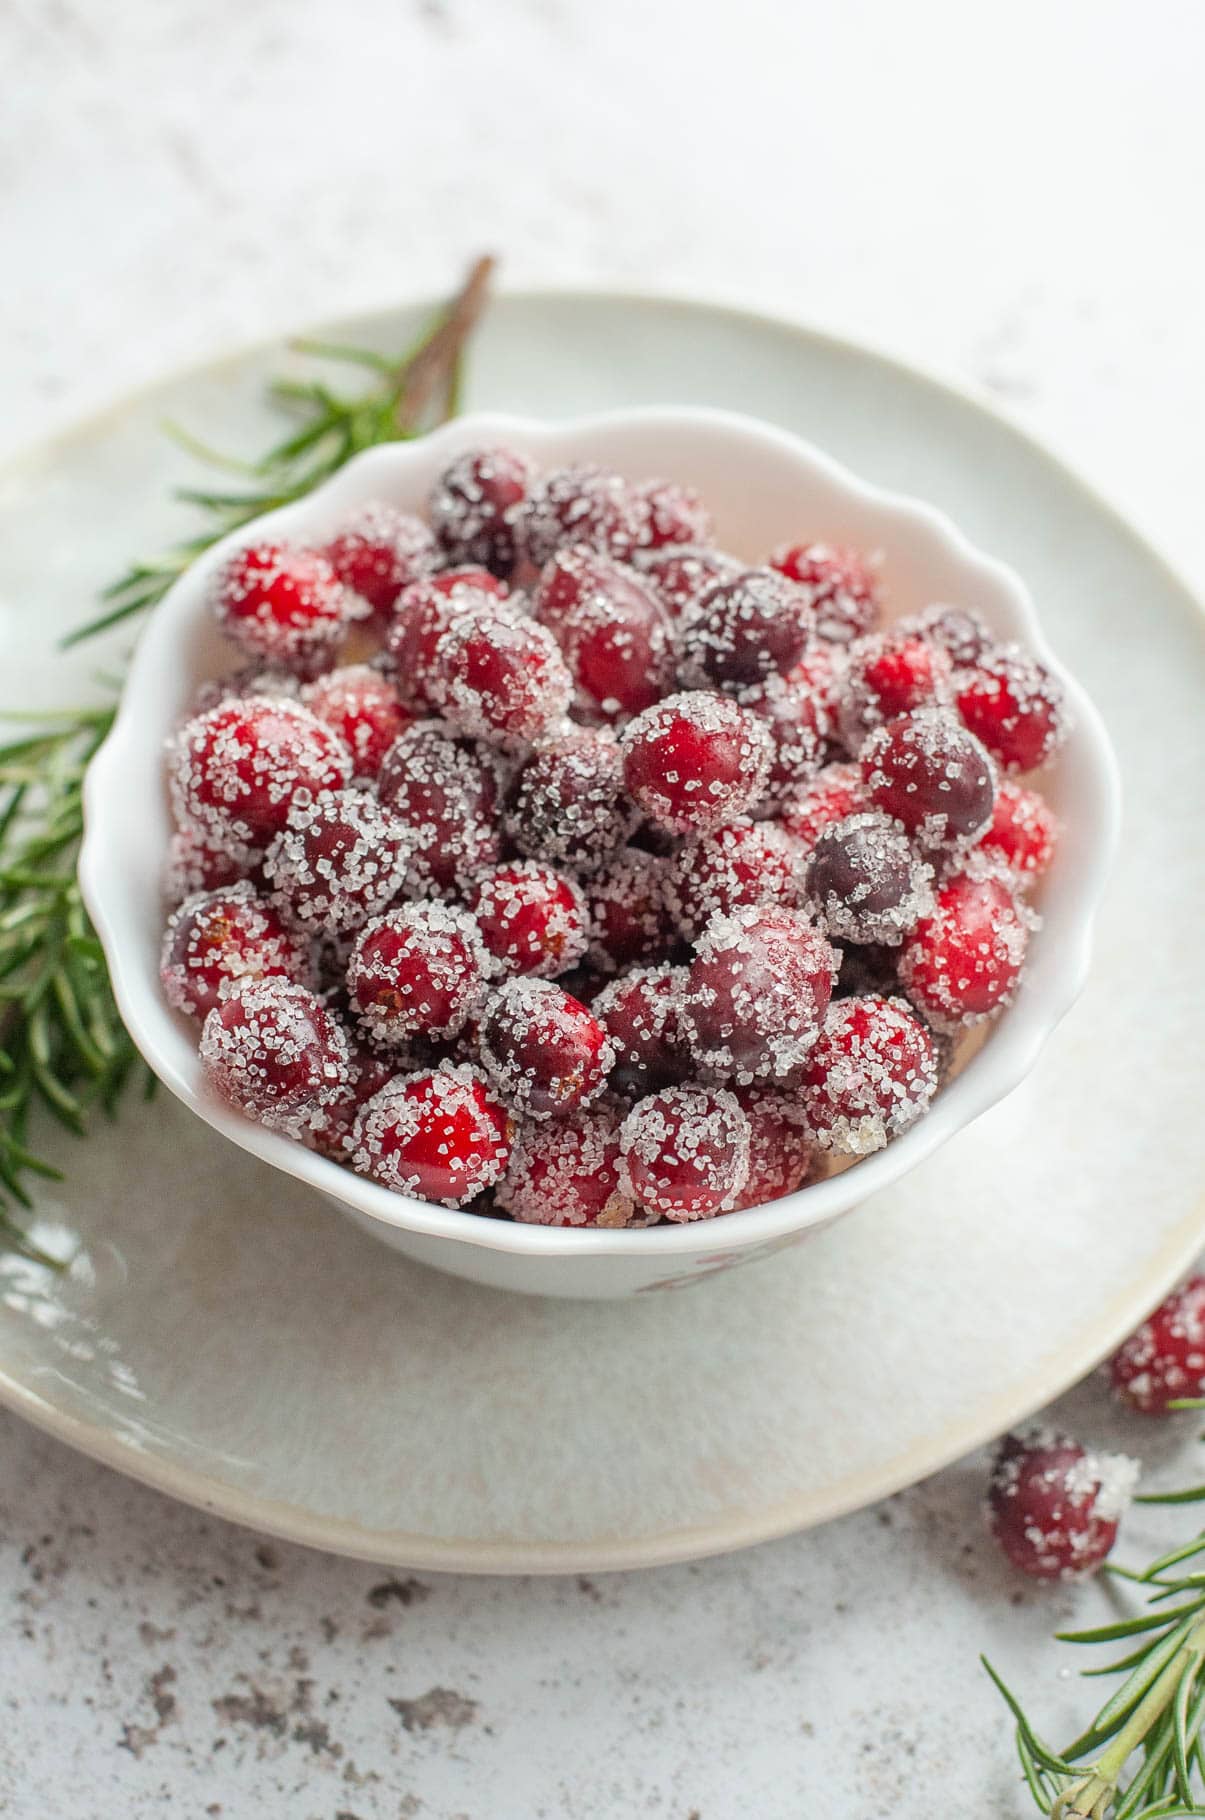 Sugared cranberries in a white bowl, rosemary twigs in the background.